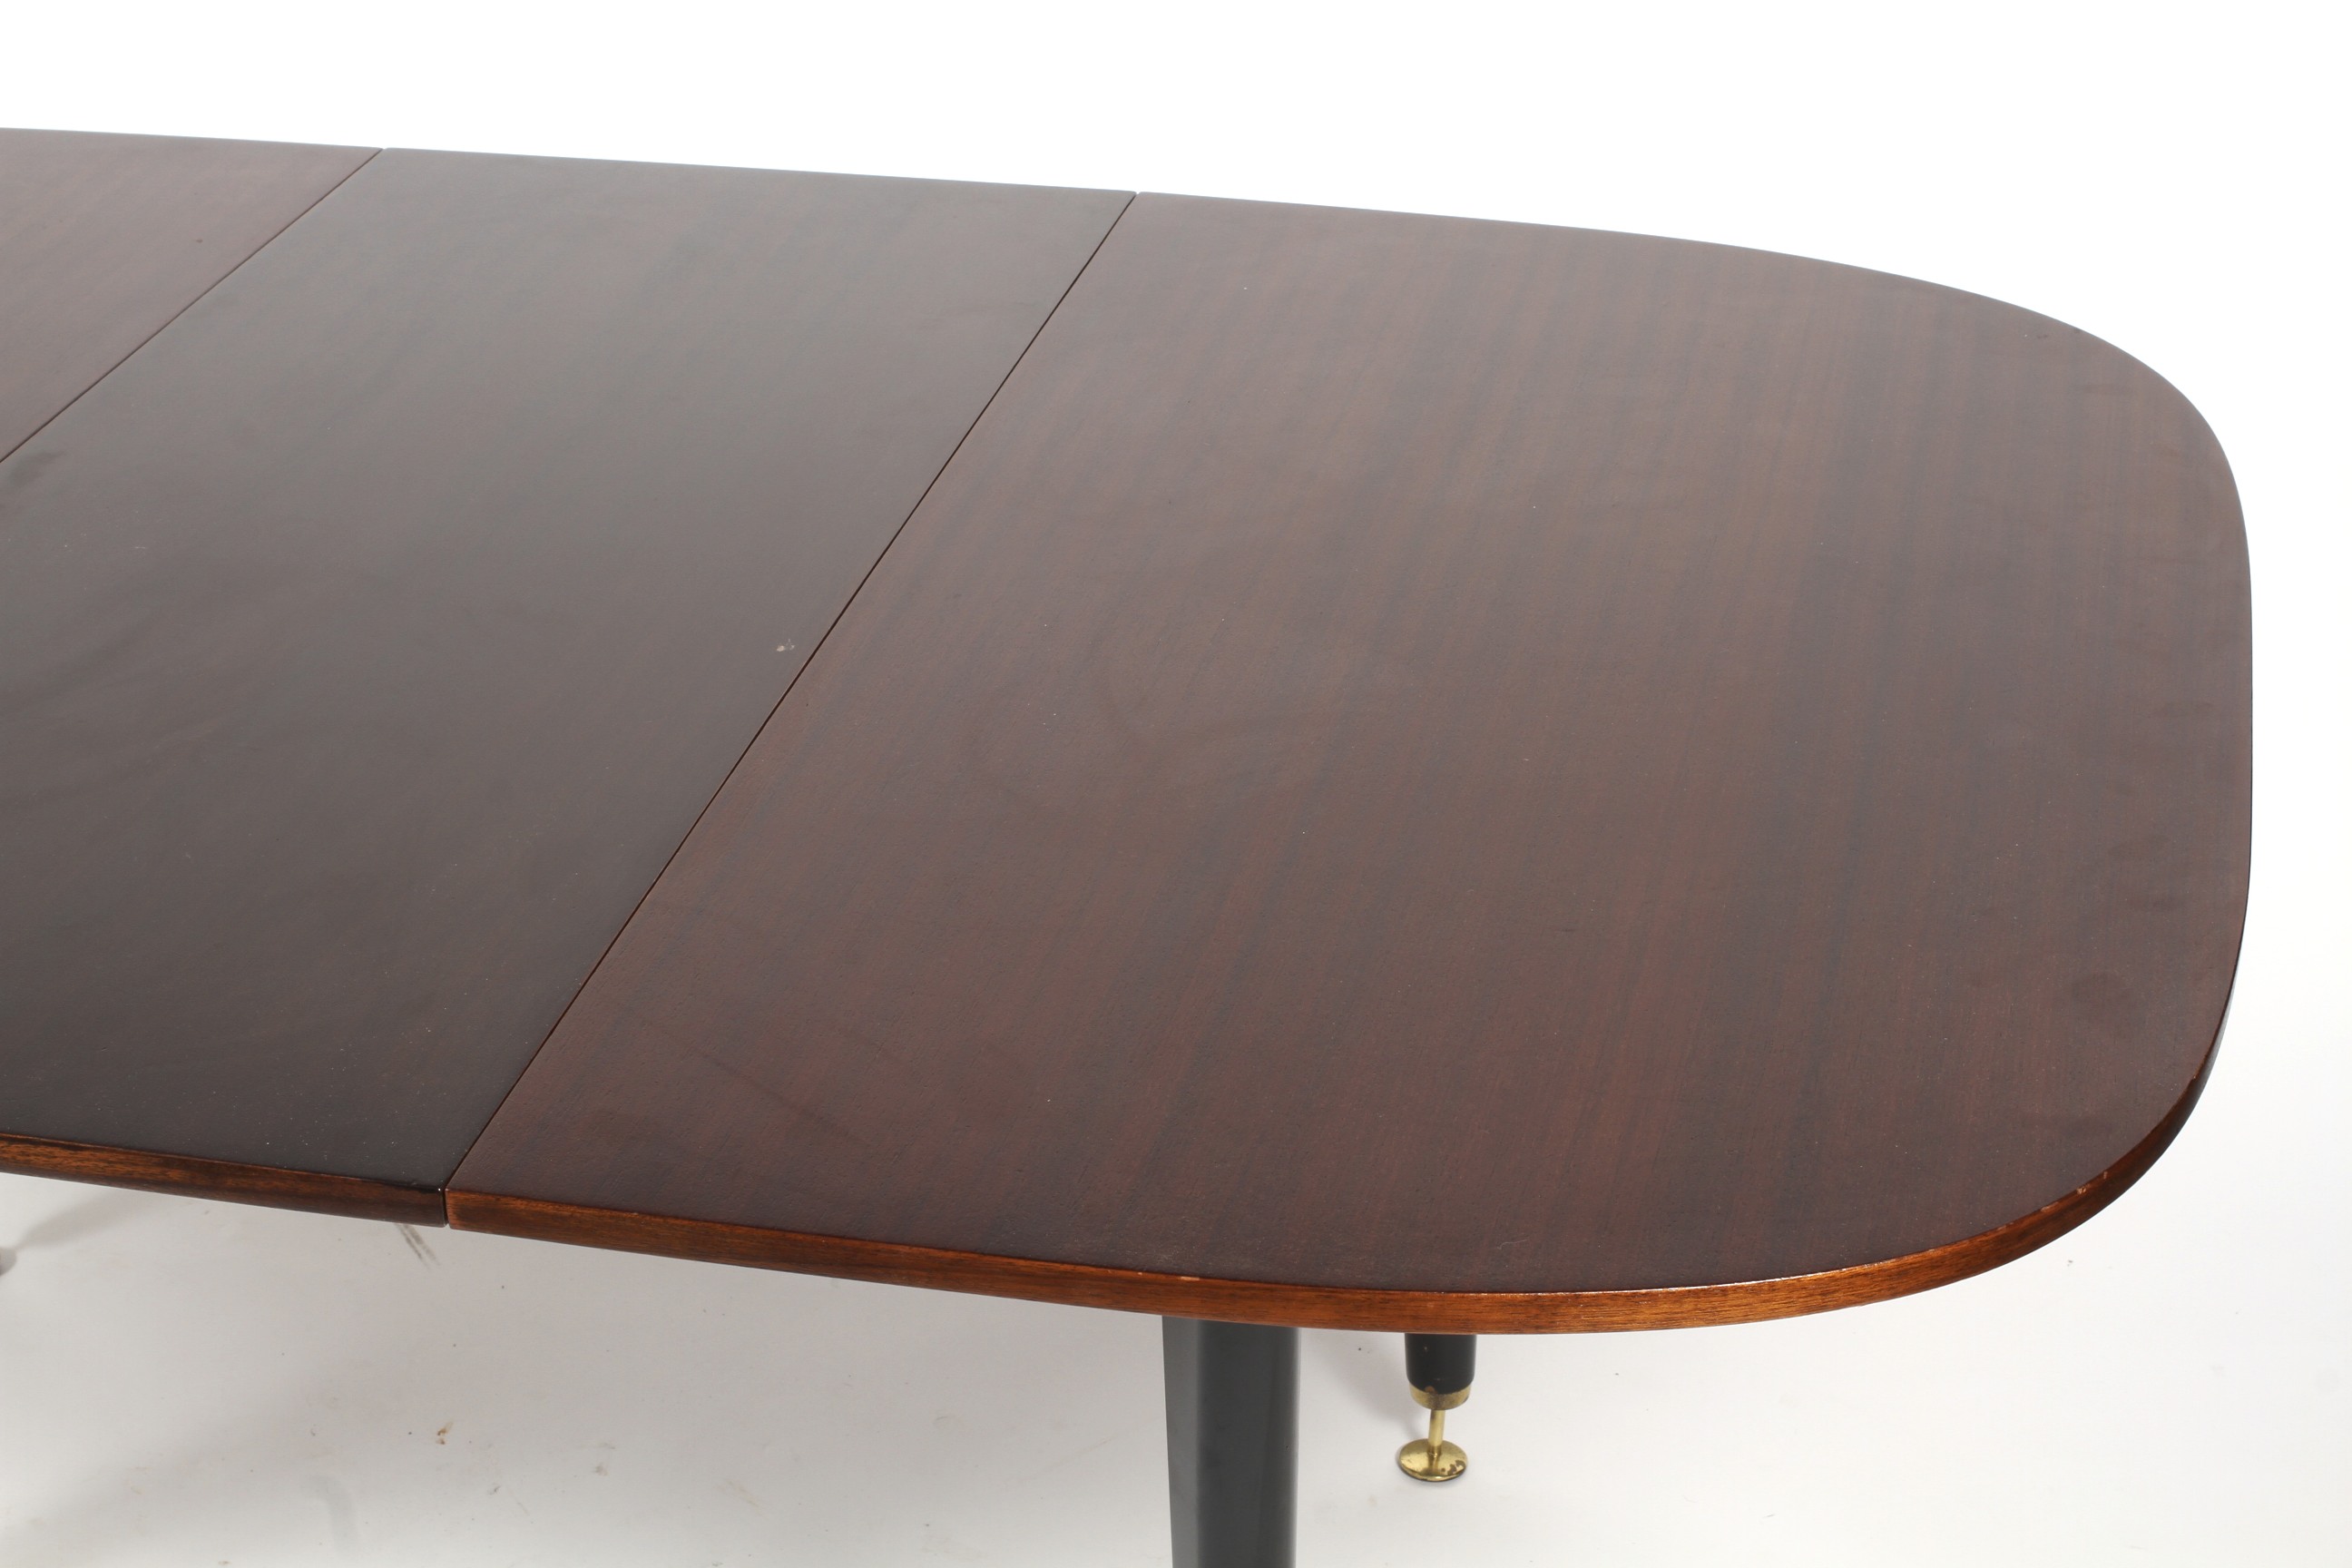 Ernest Goome for G-Plan, Librenza pattern adjustable dining table, circa 1970s. - Image 5 of 5